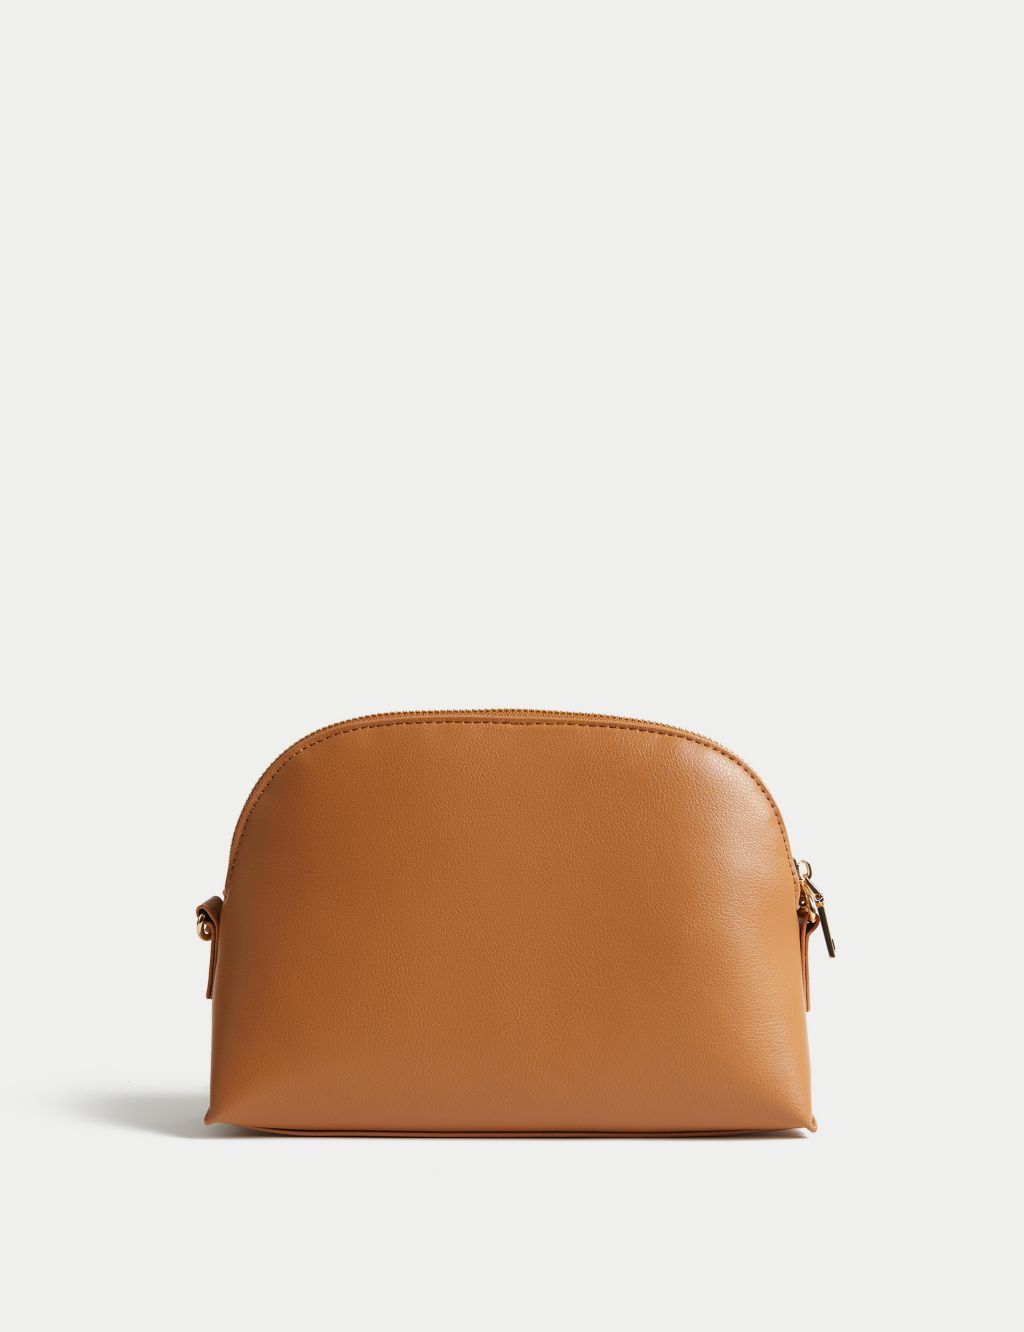 Faux Leather Cross Body Bag image 3